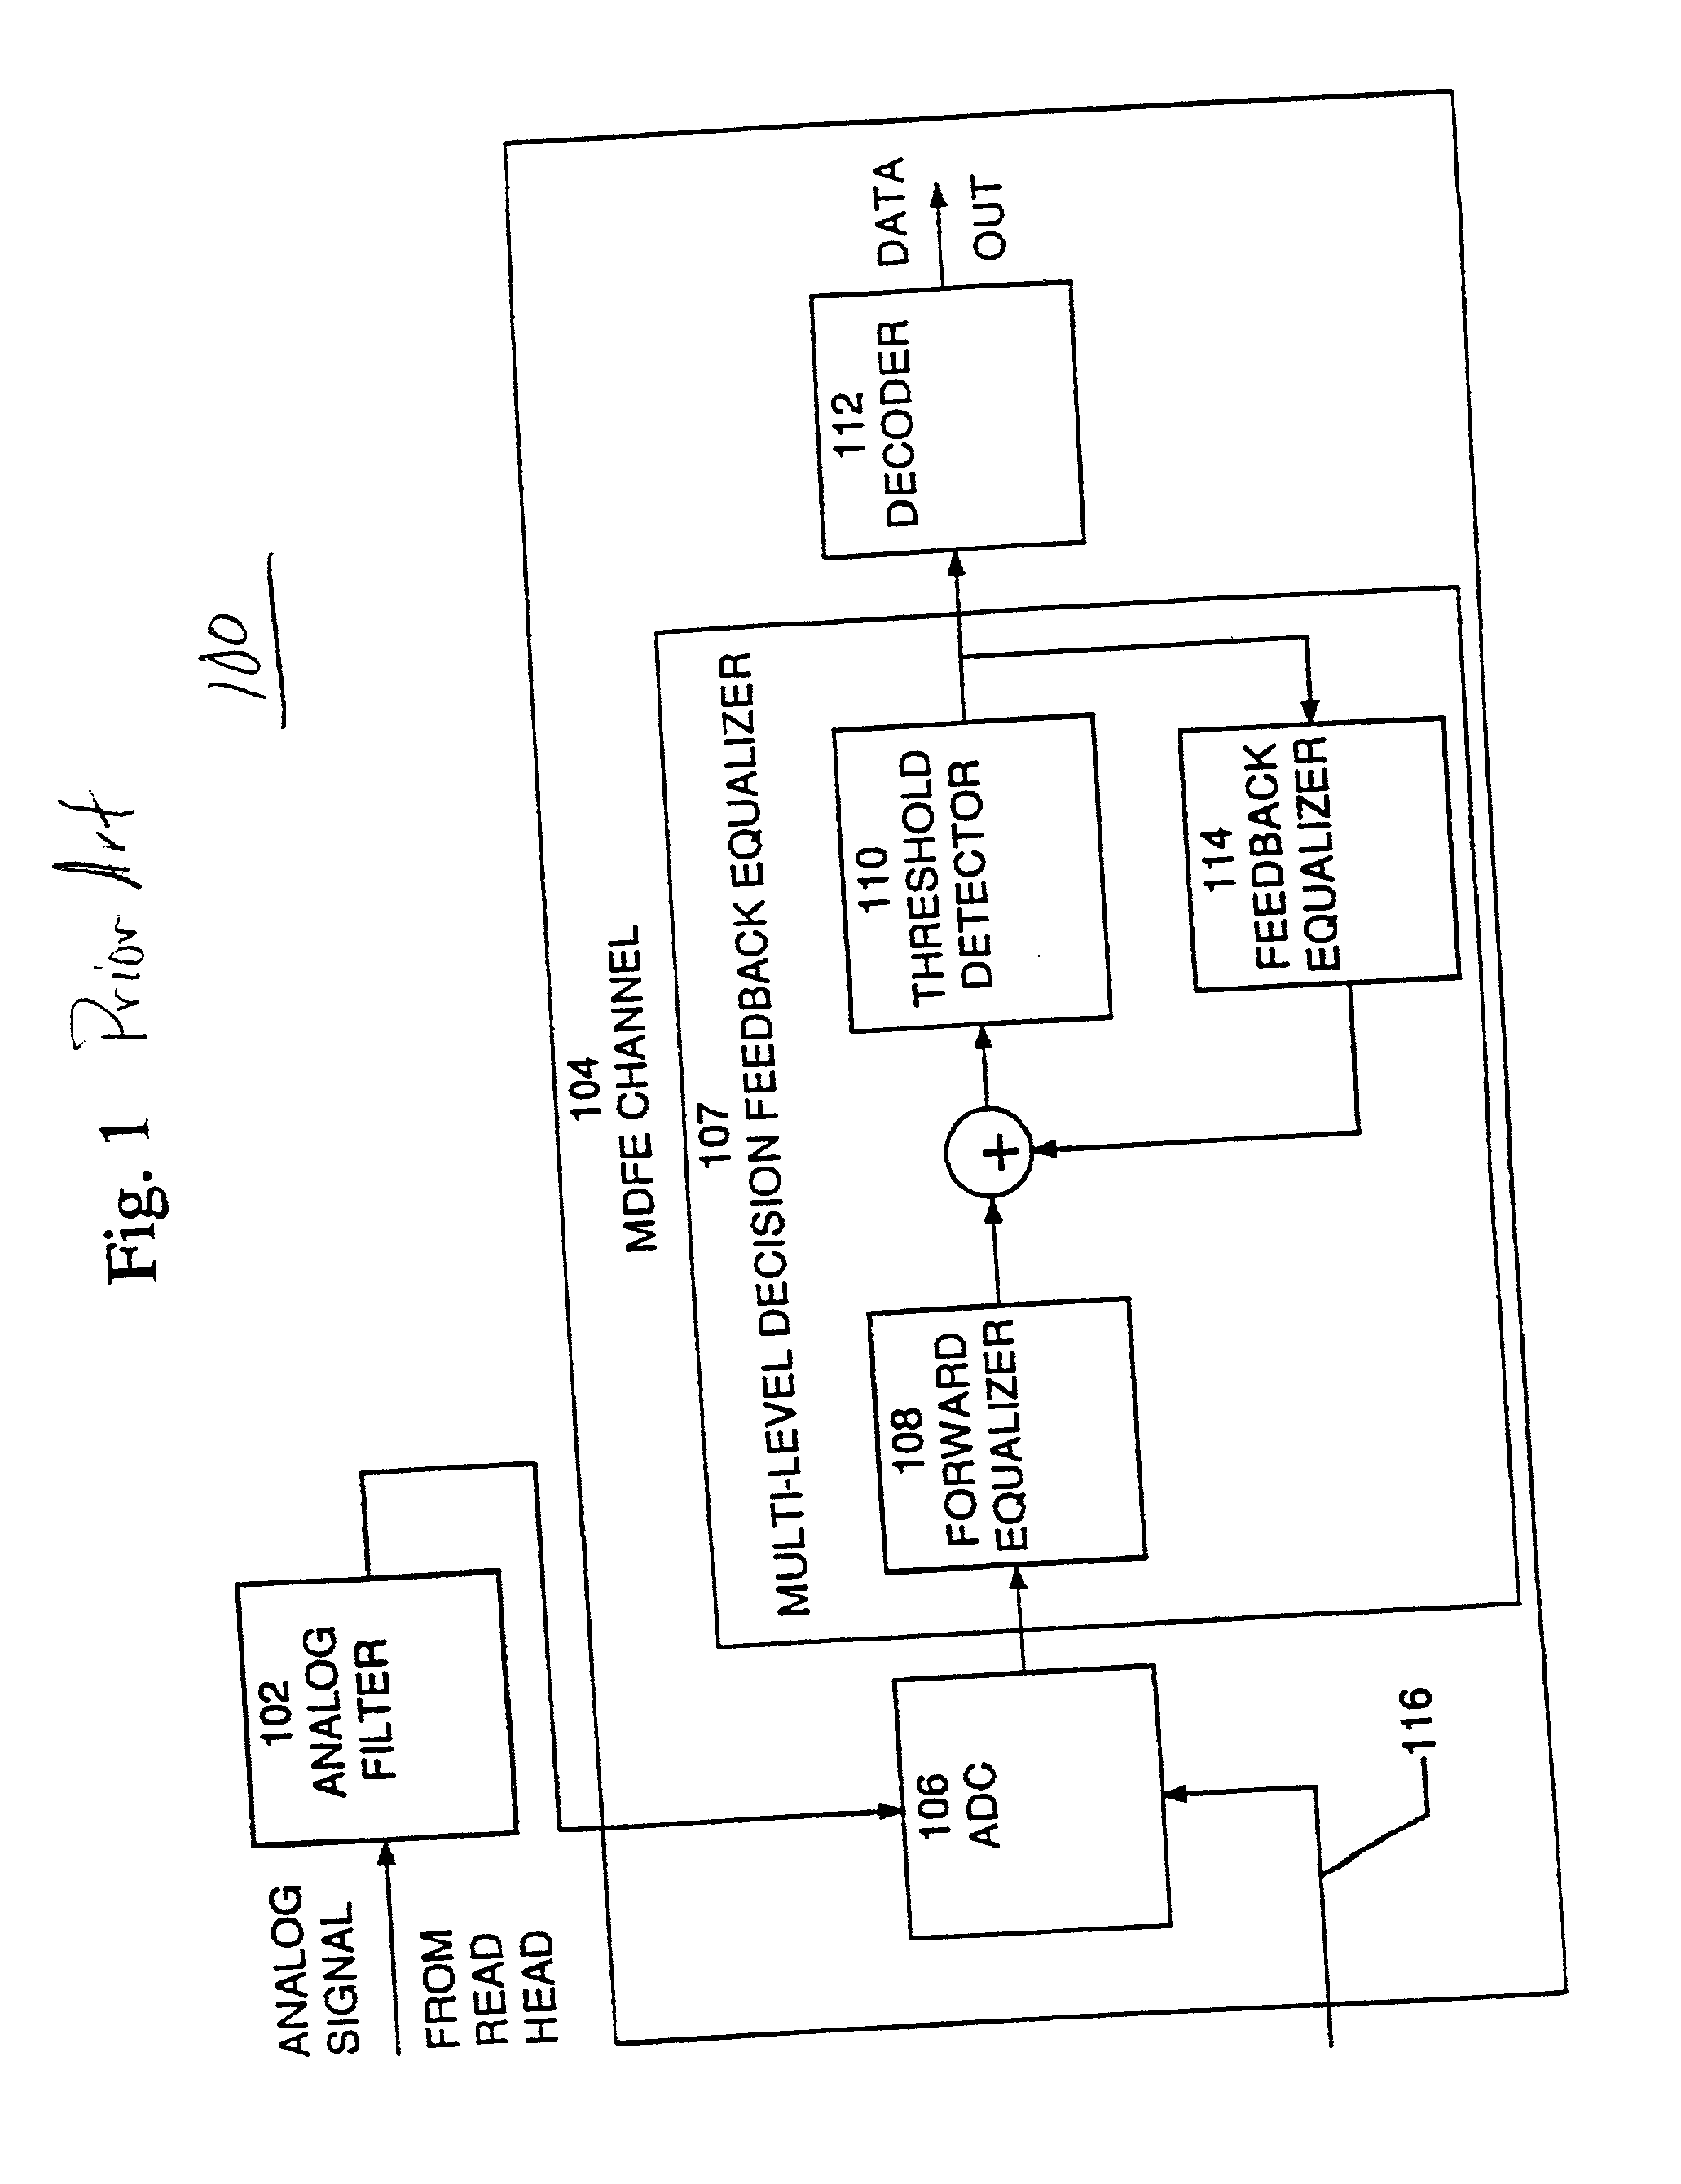 Nonlinear equalizer and decoding circuit and method using same